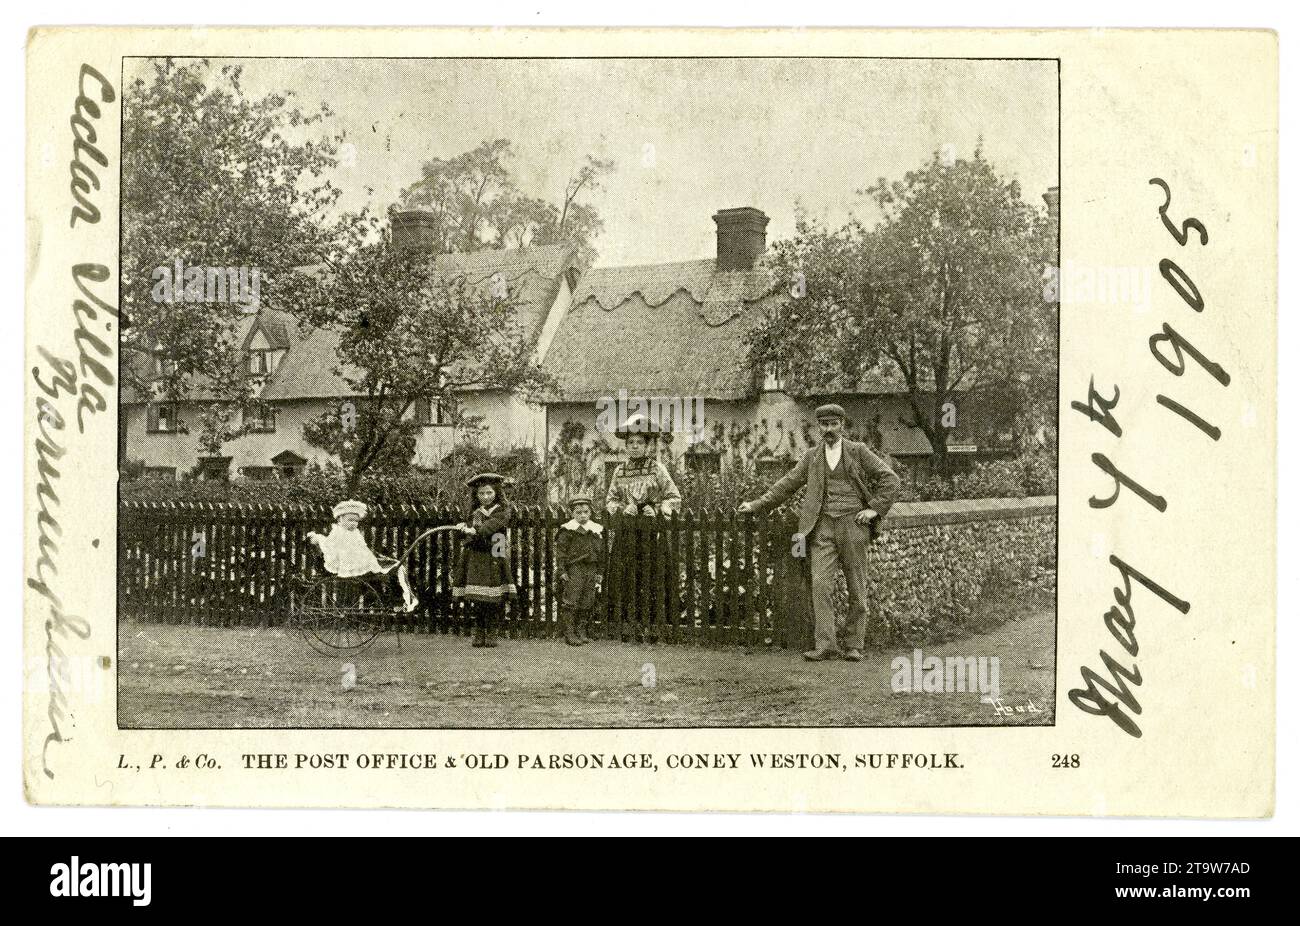 Original Edwardian postcard of Post Office and Parsonage, Coney Weston, Suffolk, a respectable family pose outside the front gate, a child pushes a pram, possibly the postmaster or postmistress.  a typical early 1900's scene in rural England. Postcard dated 7th May1905 on front. Suffolk, England, U.K. Stock Photo